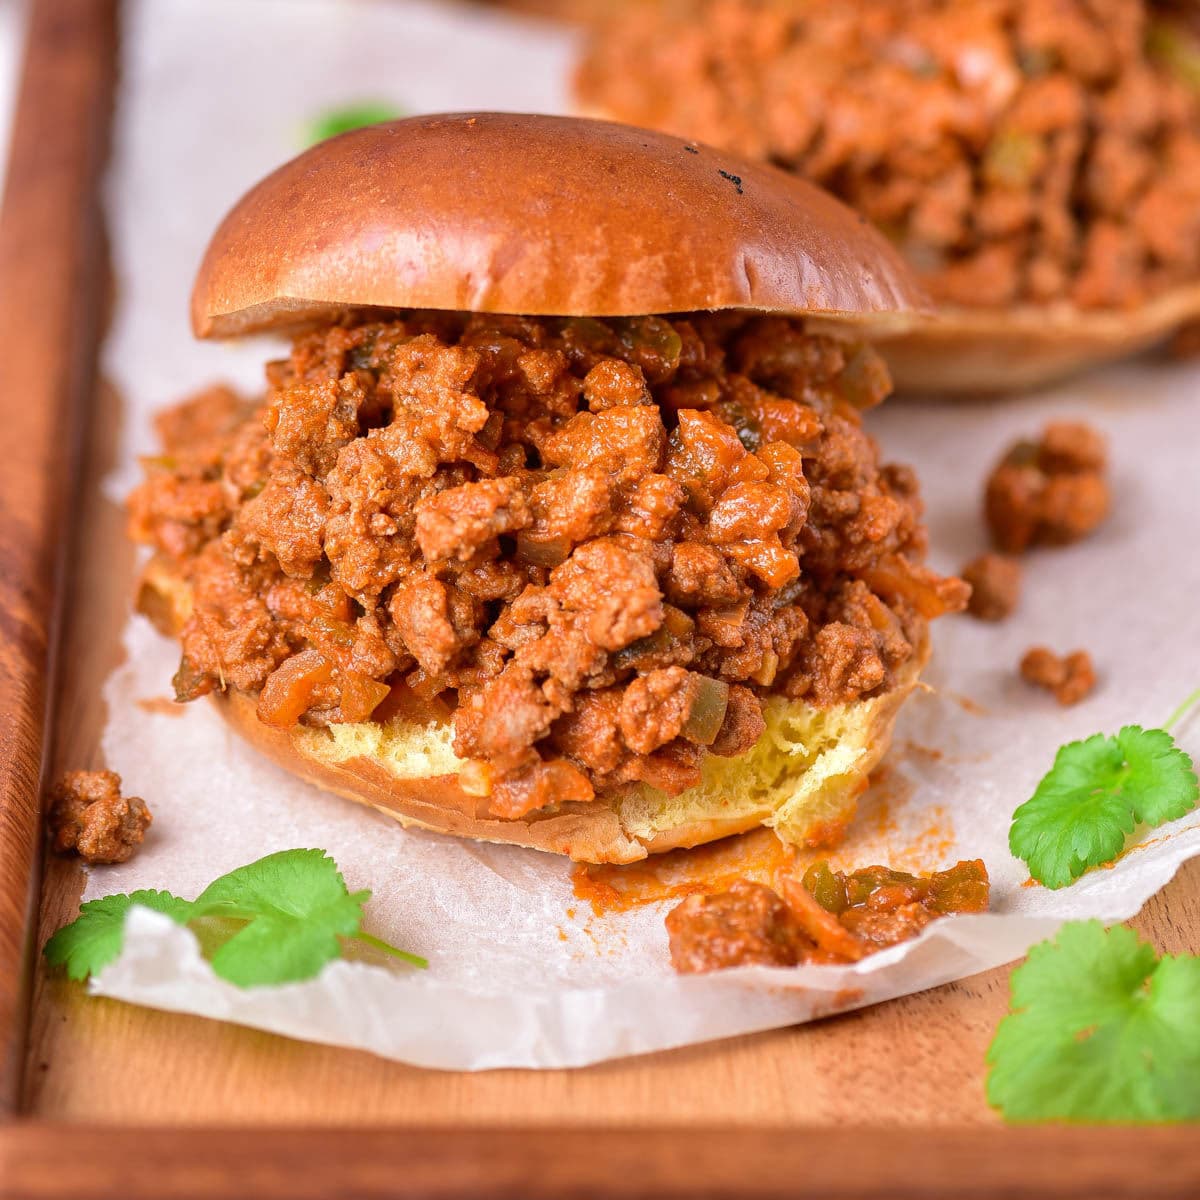 Old Fashioned Homemade Sloppy Joes Recipe from the 1950s